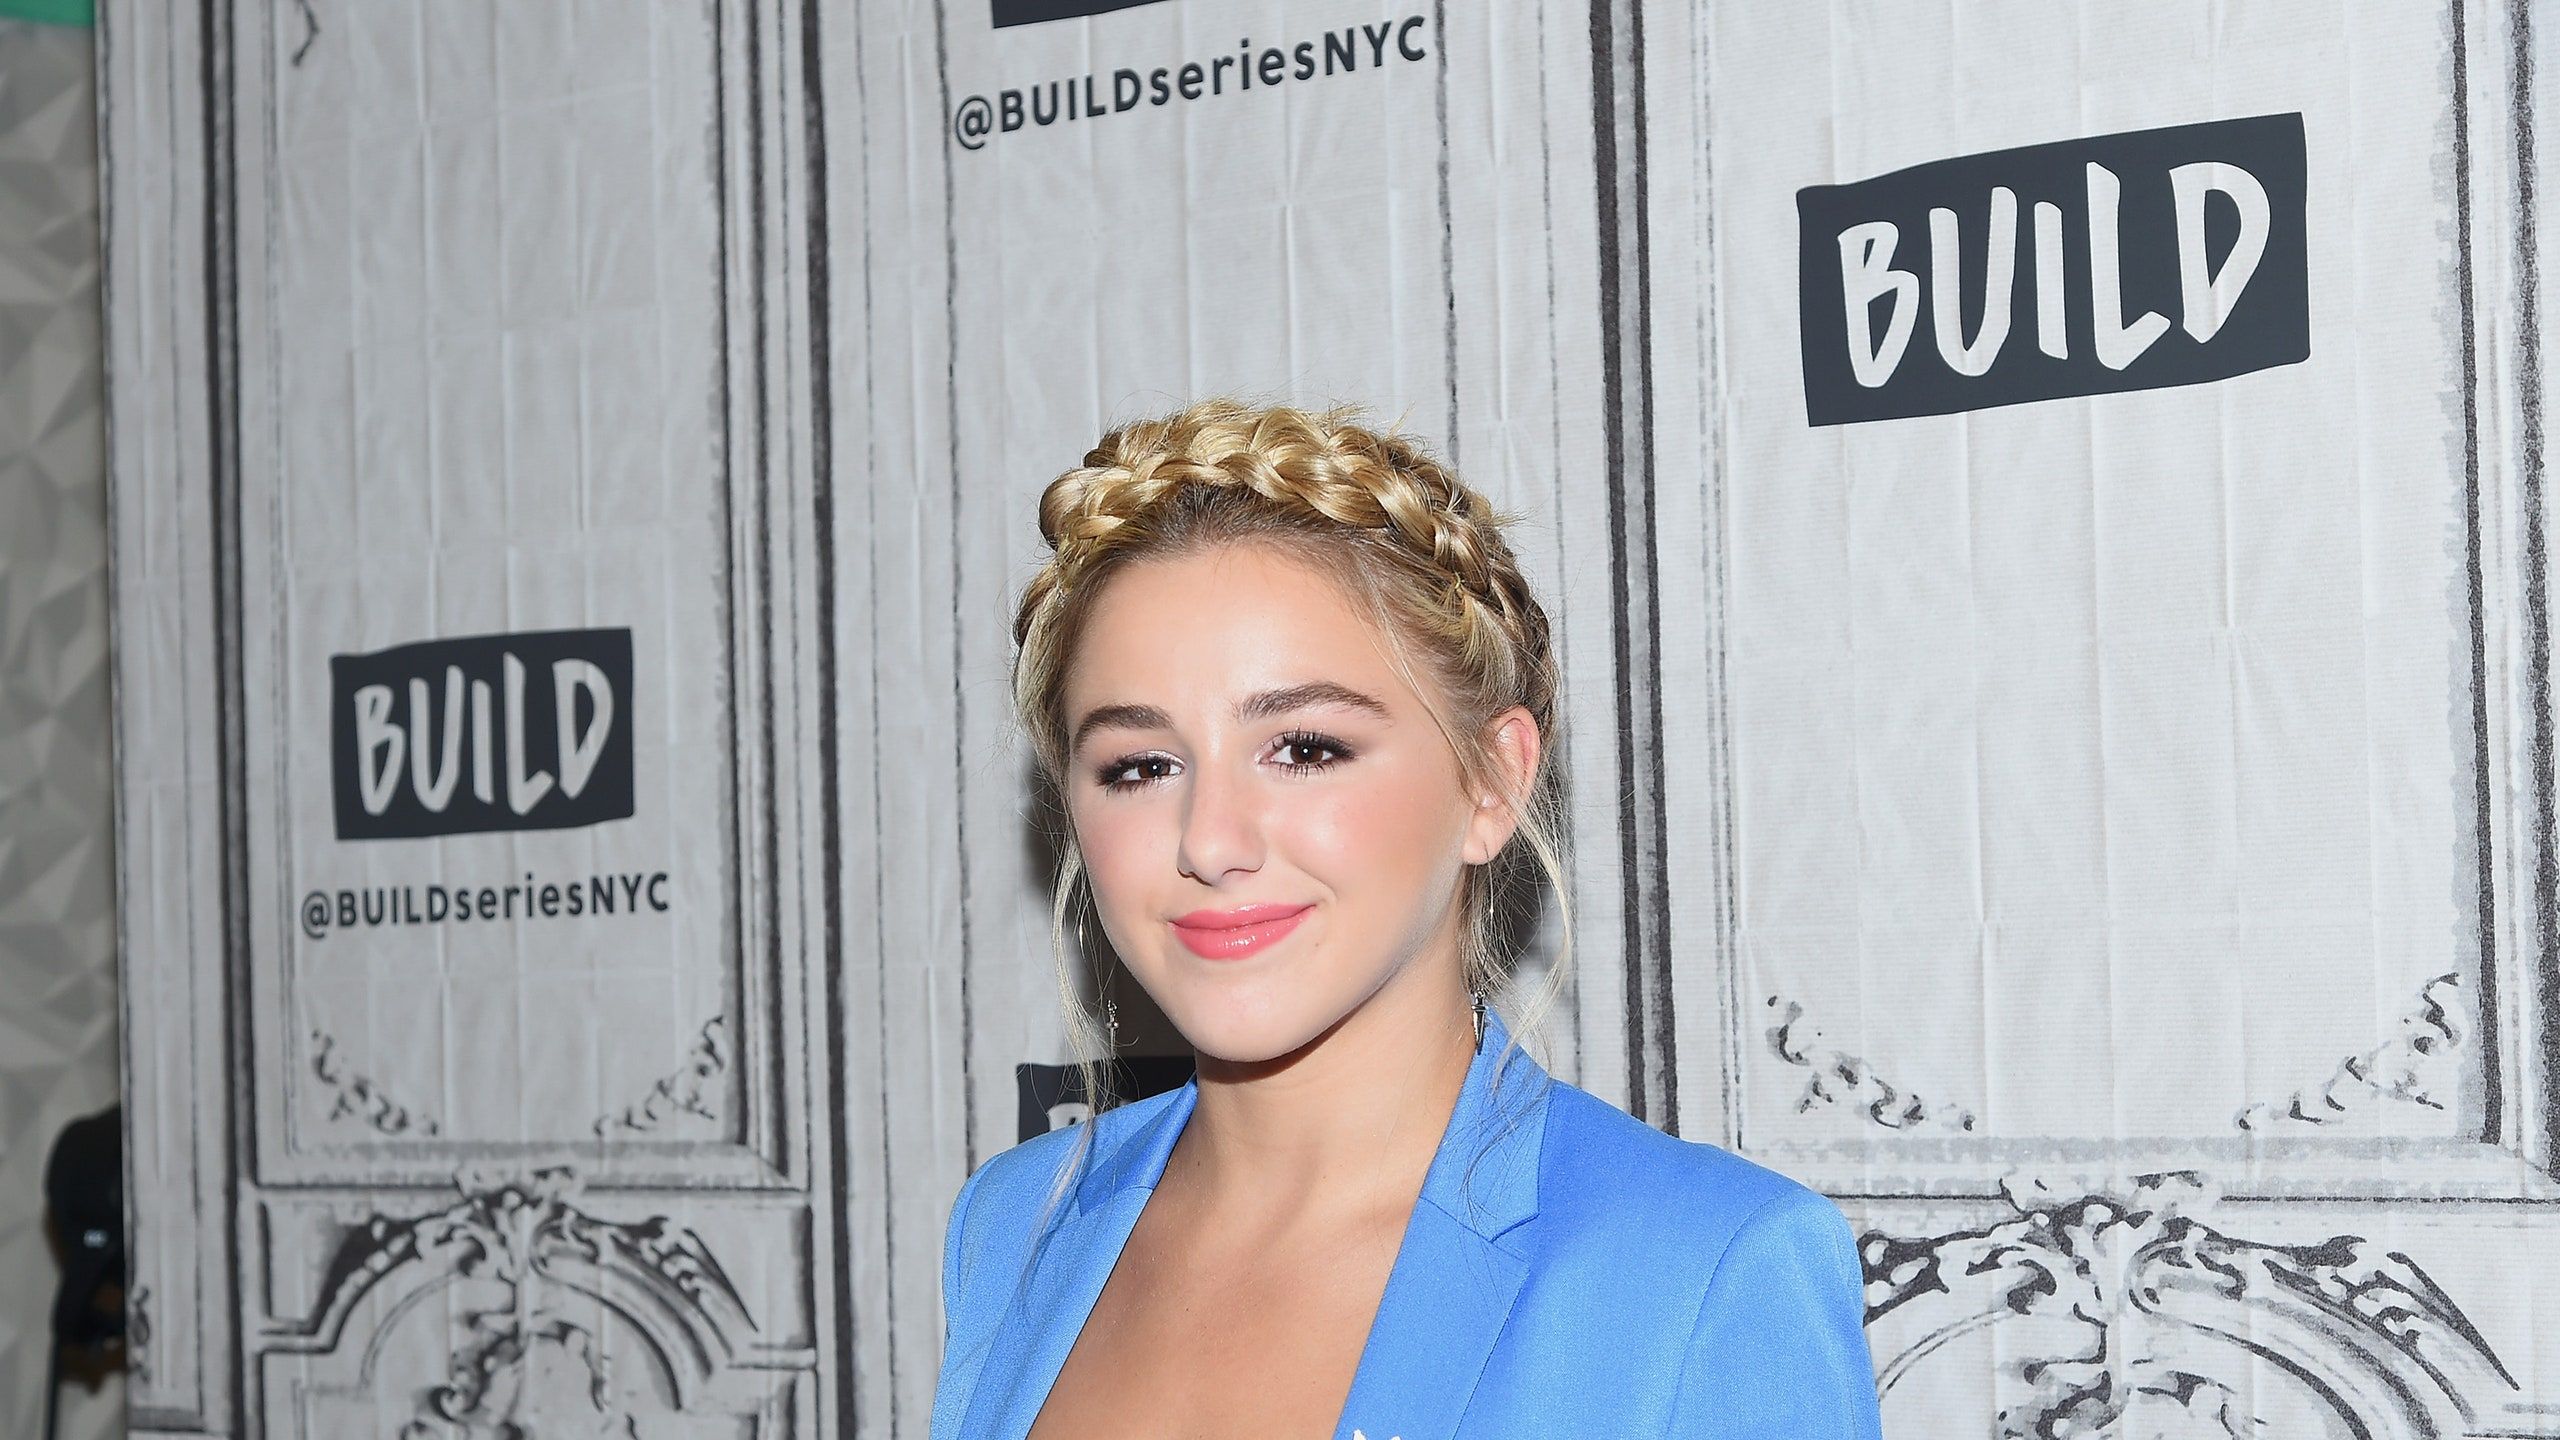 Chloe Lukasiak On Abby Lee Miller and Lessons From “Dance Moms